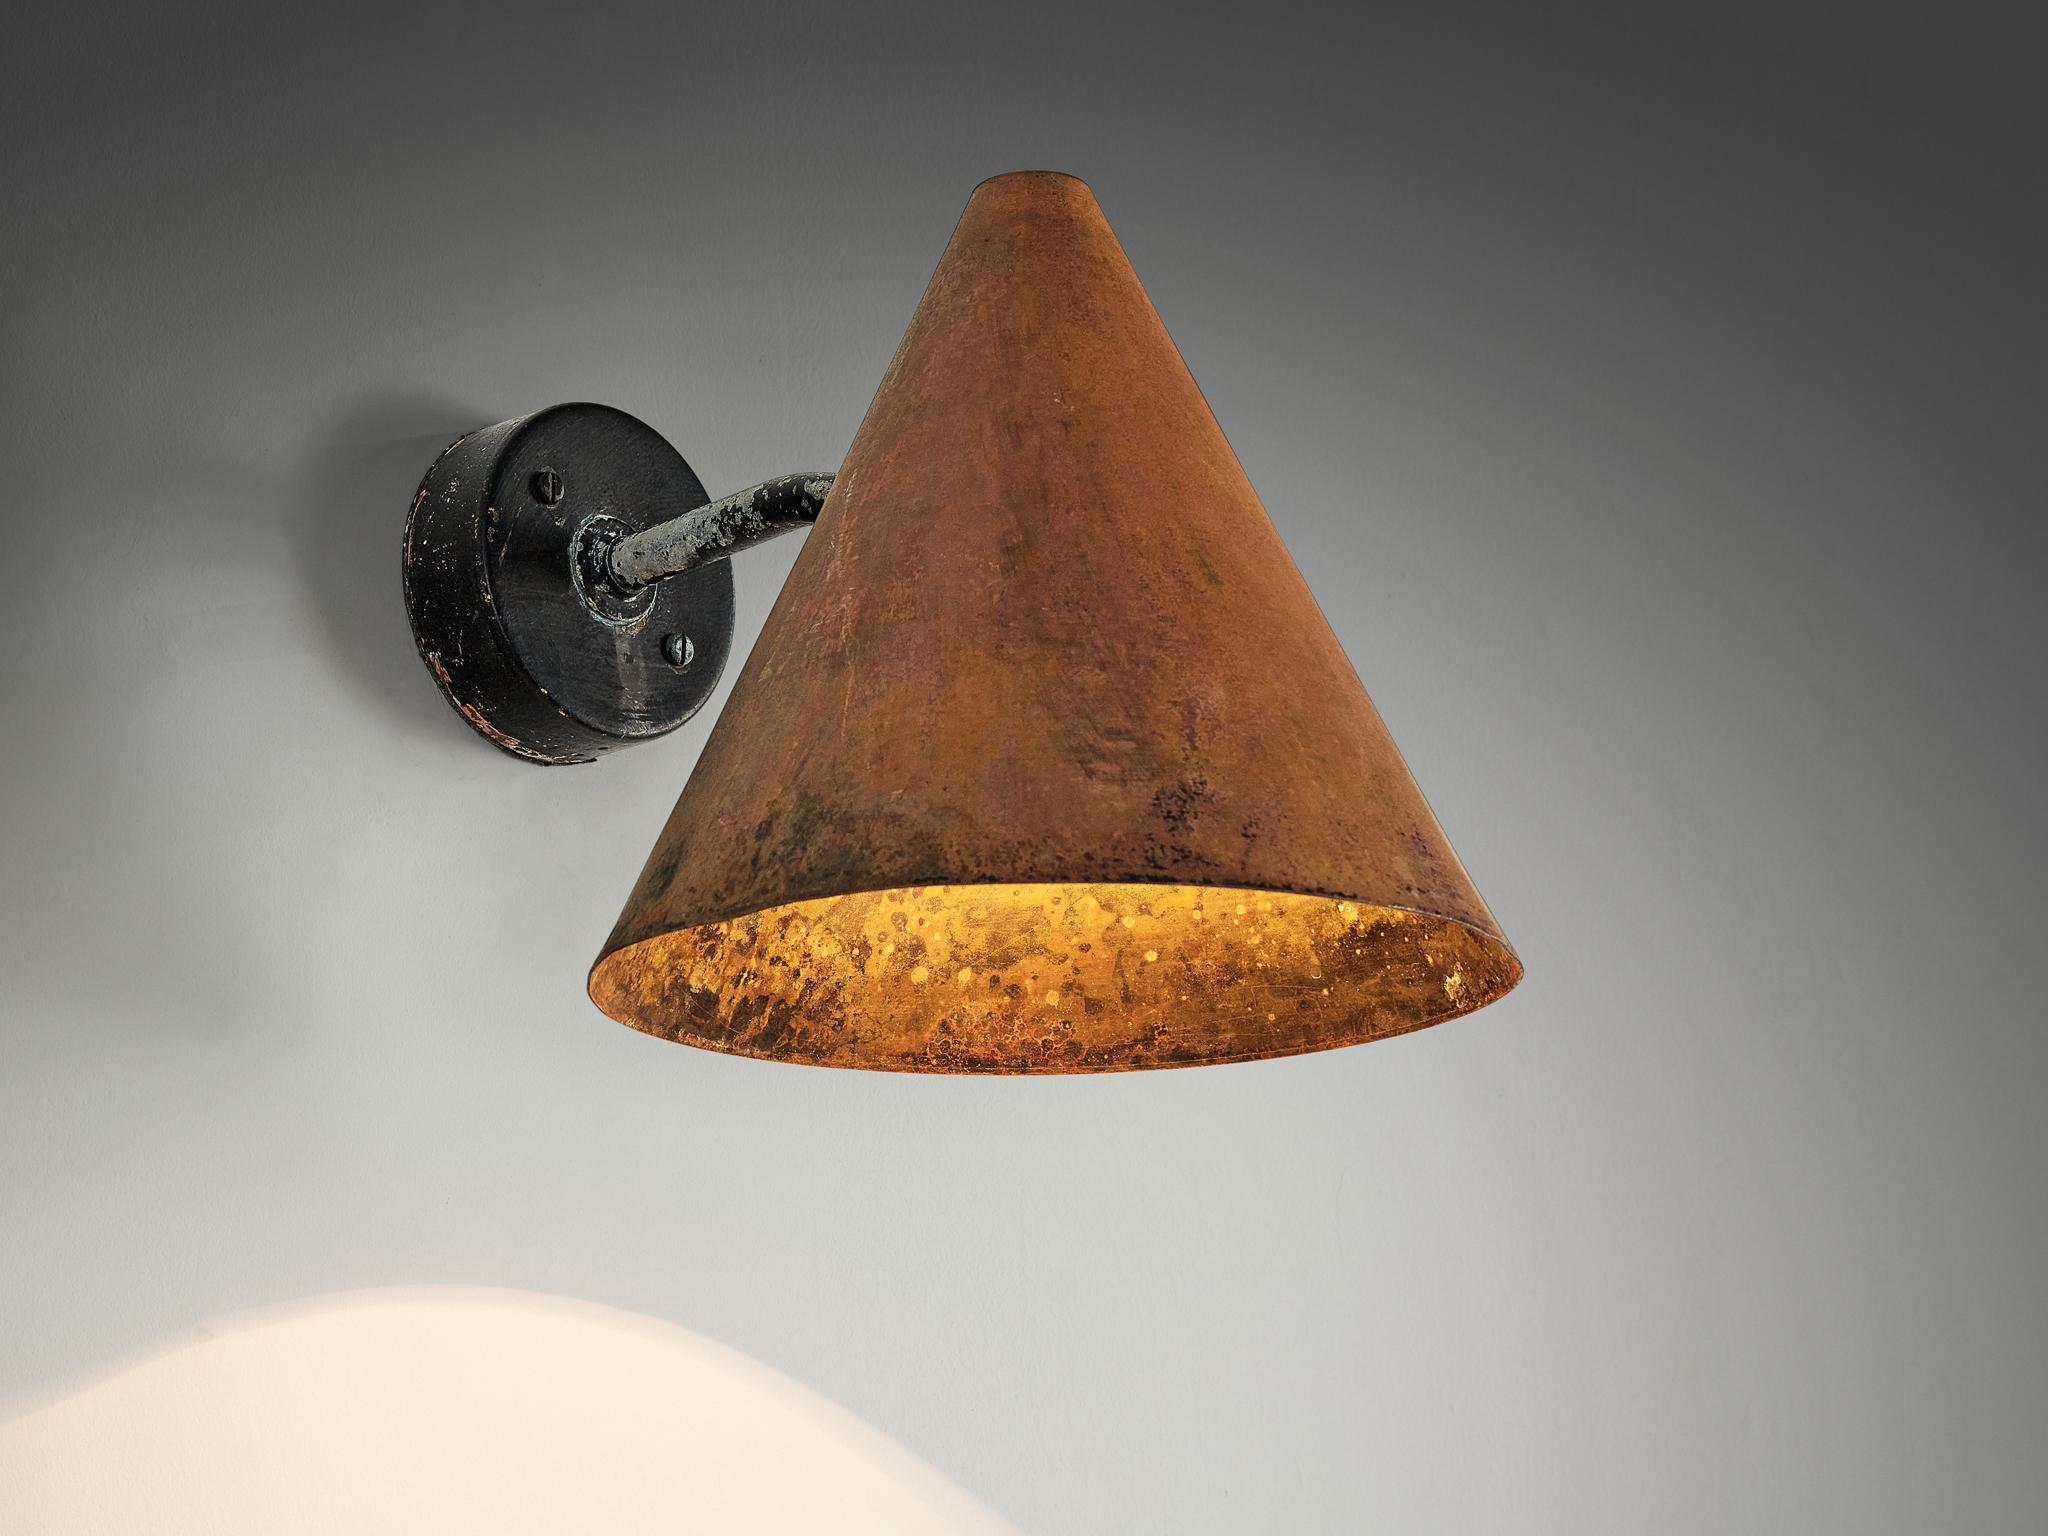 Hans-Agne Jakobsson for Hans-Agne Jakobsson AB in Markaryd, wall light ‘Tratten’, copper, Sweden, 1950s

Hans-Agne Jakobsson designed this wall light 'Tratten', which is made in a beautiful red copper. The conical-shaped shade is secured to a